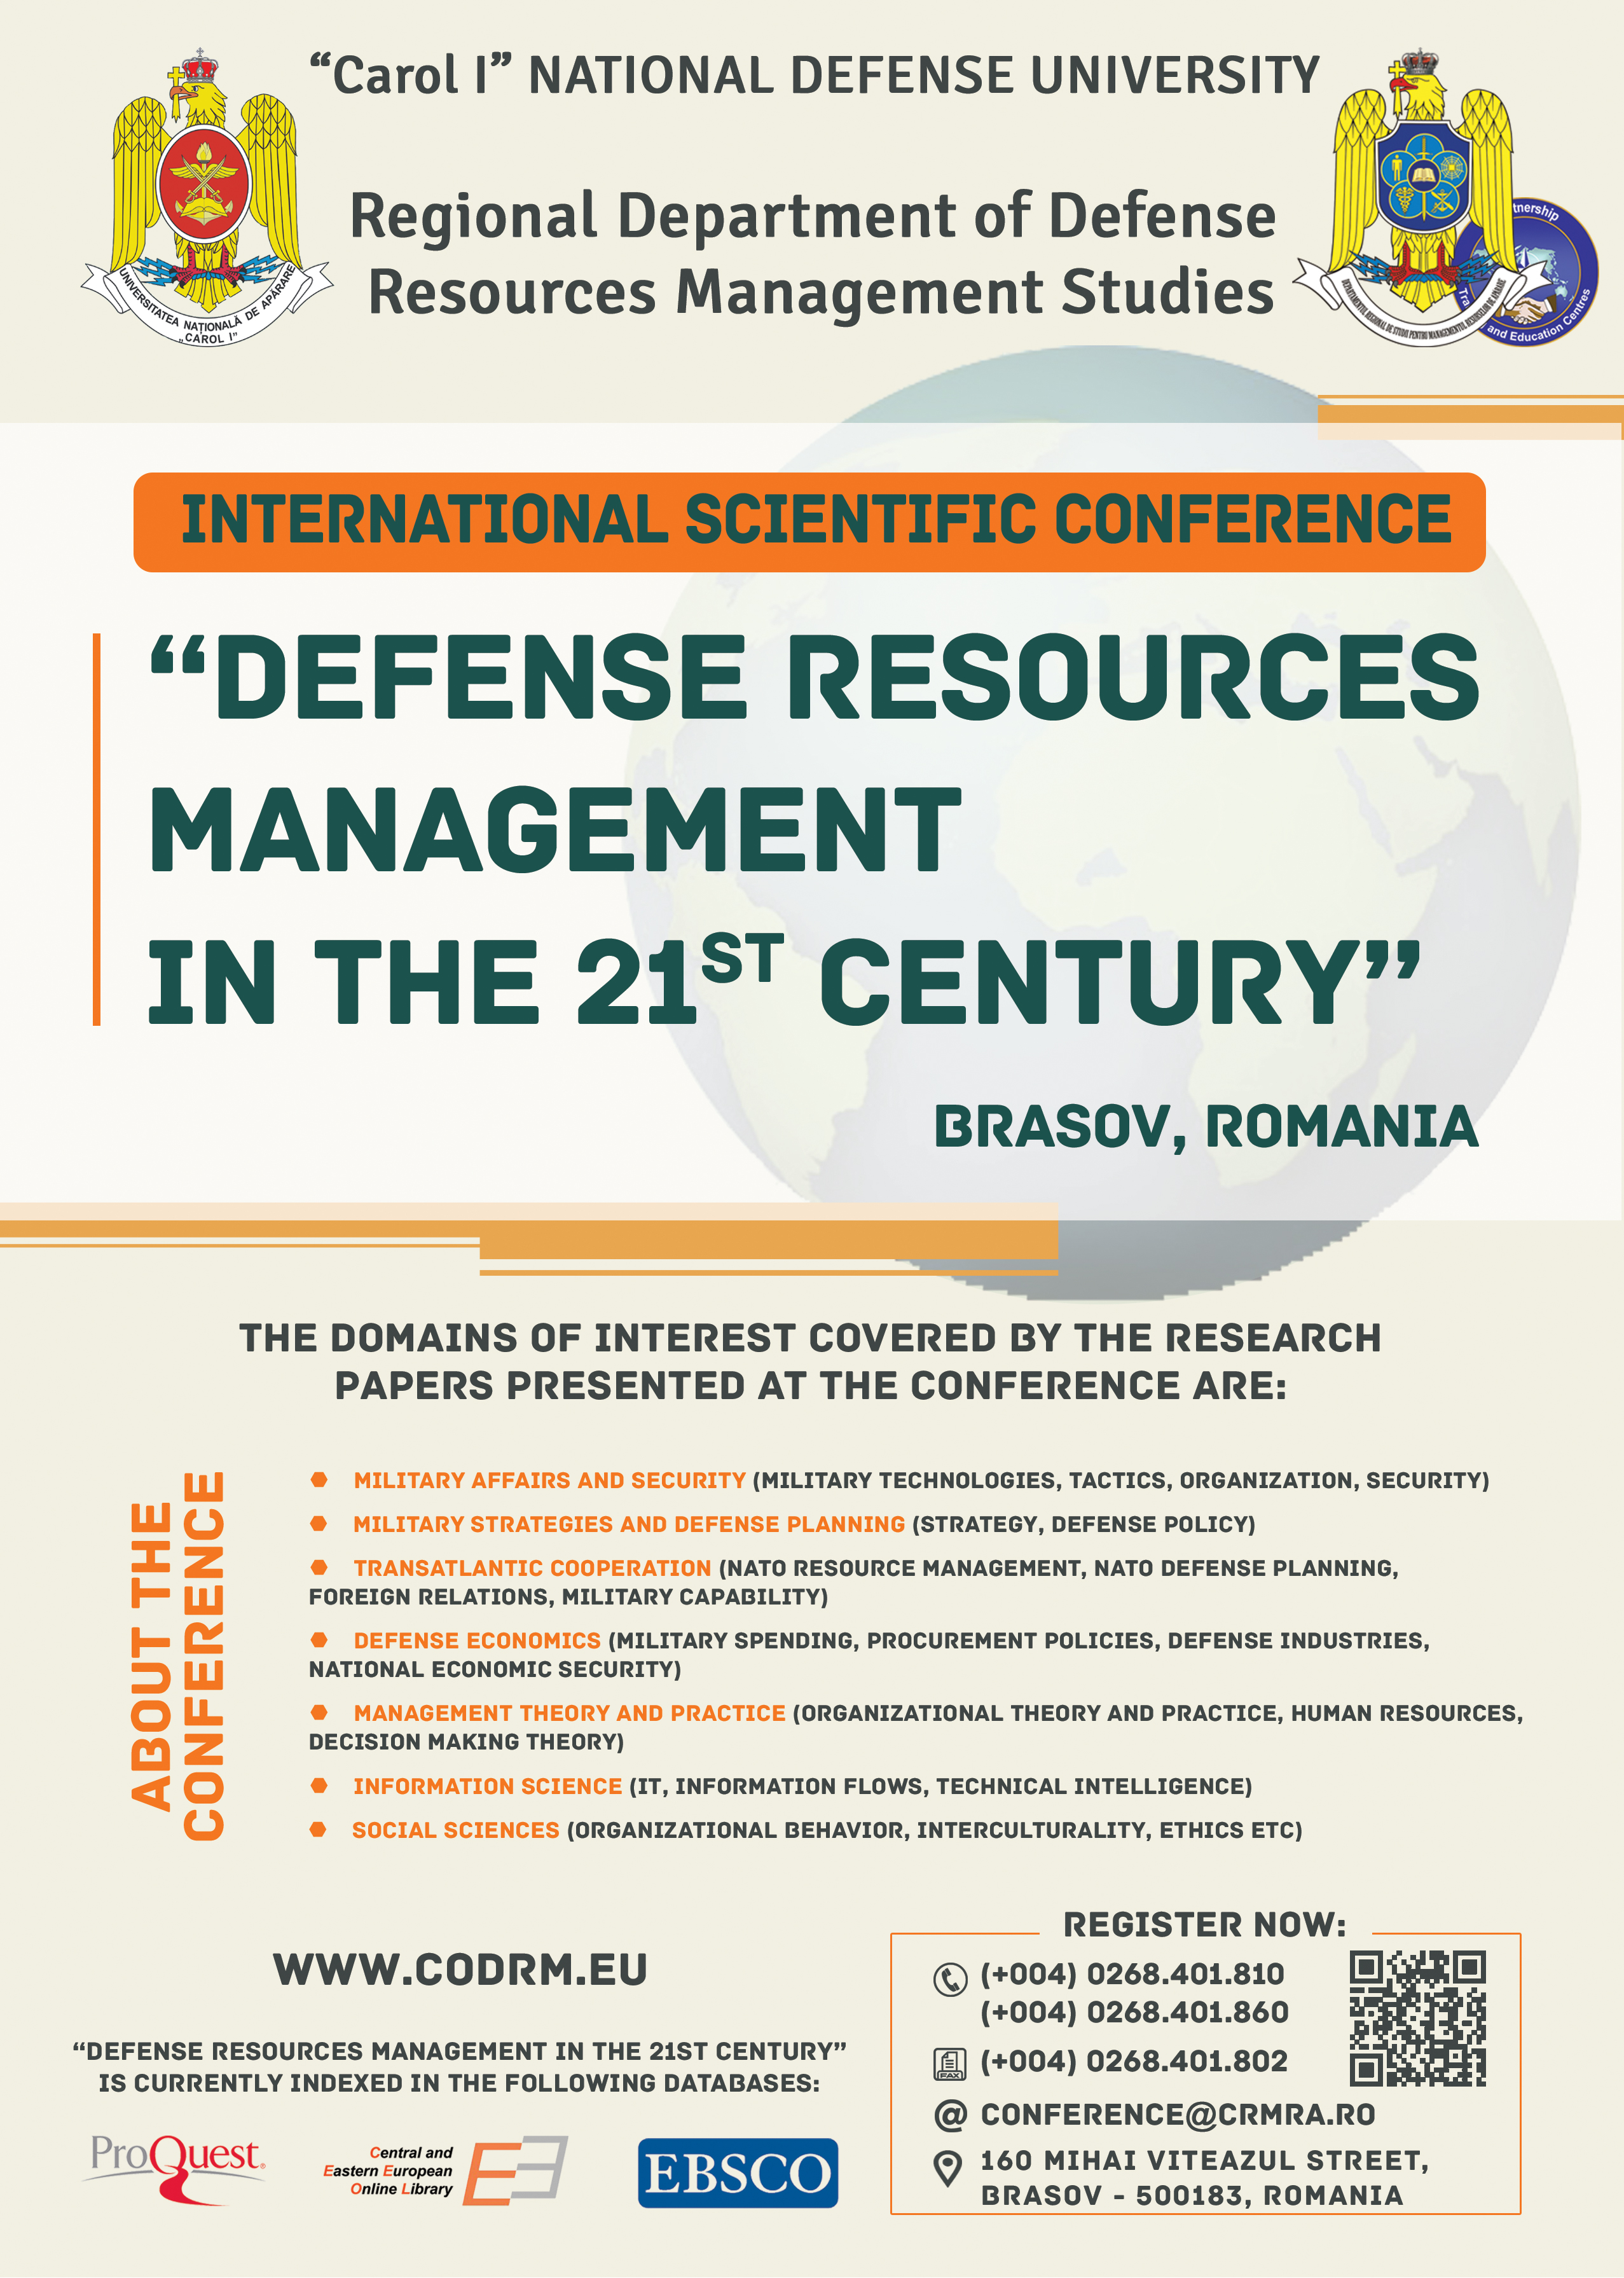 THE MAIN QUANTIFICATION INDICATORS OF THE IMPACT OF THE INTEGRATED DEFENSE RESOURCES MANAGEMENT UPON ACCOMPLISHMENT OF THE INTERNATIONAL MILITARY MISSIONS